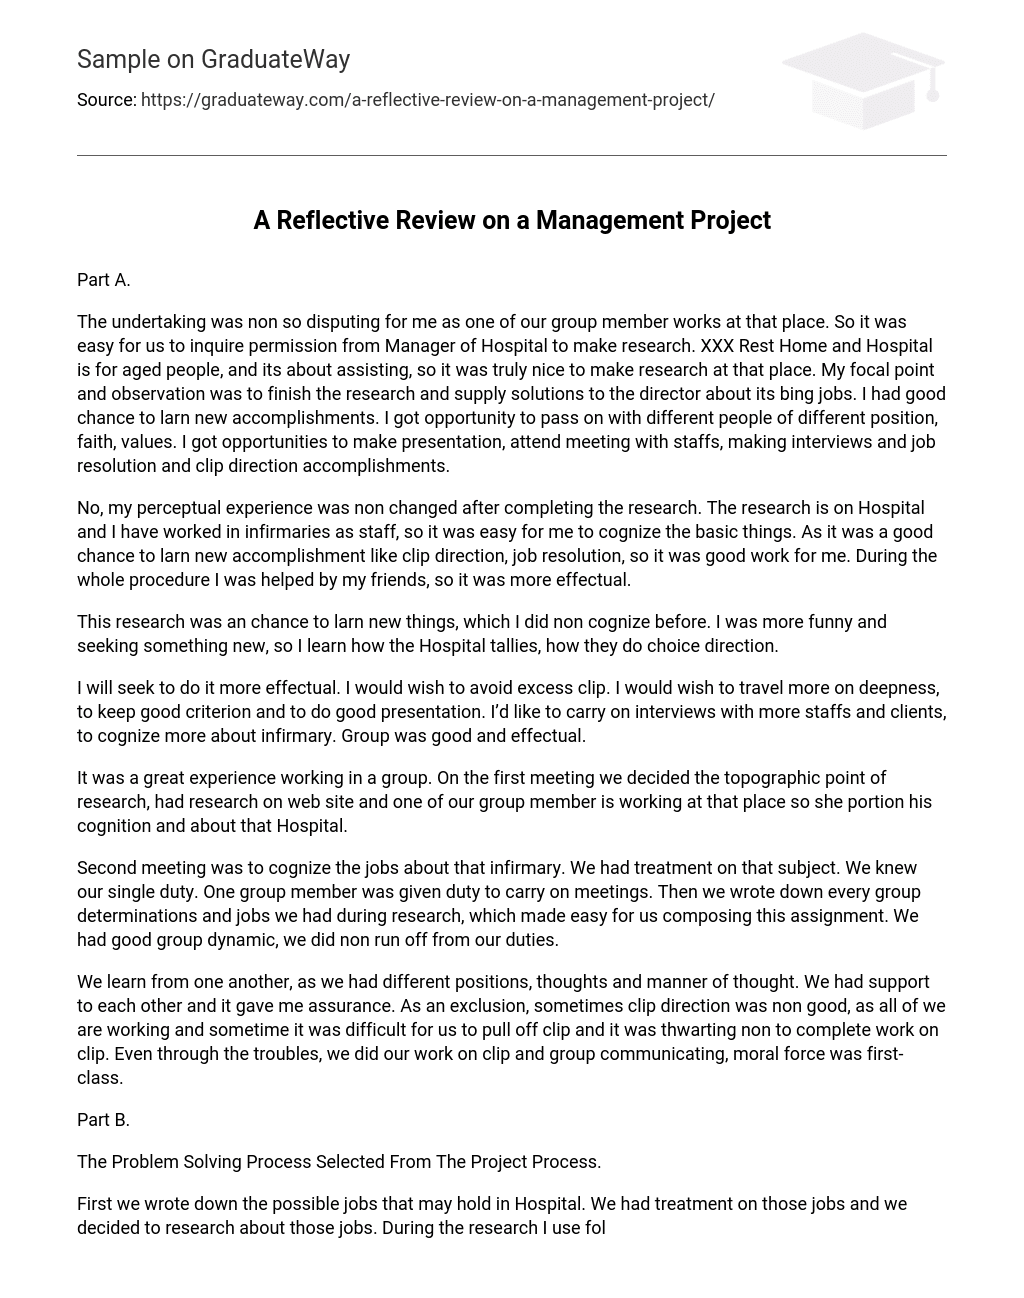 A Reflective Review on a Management Project